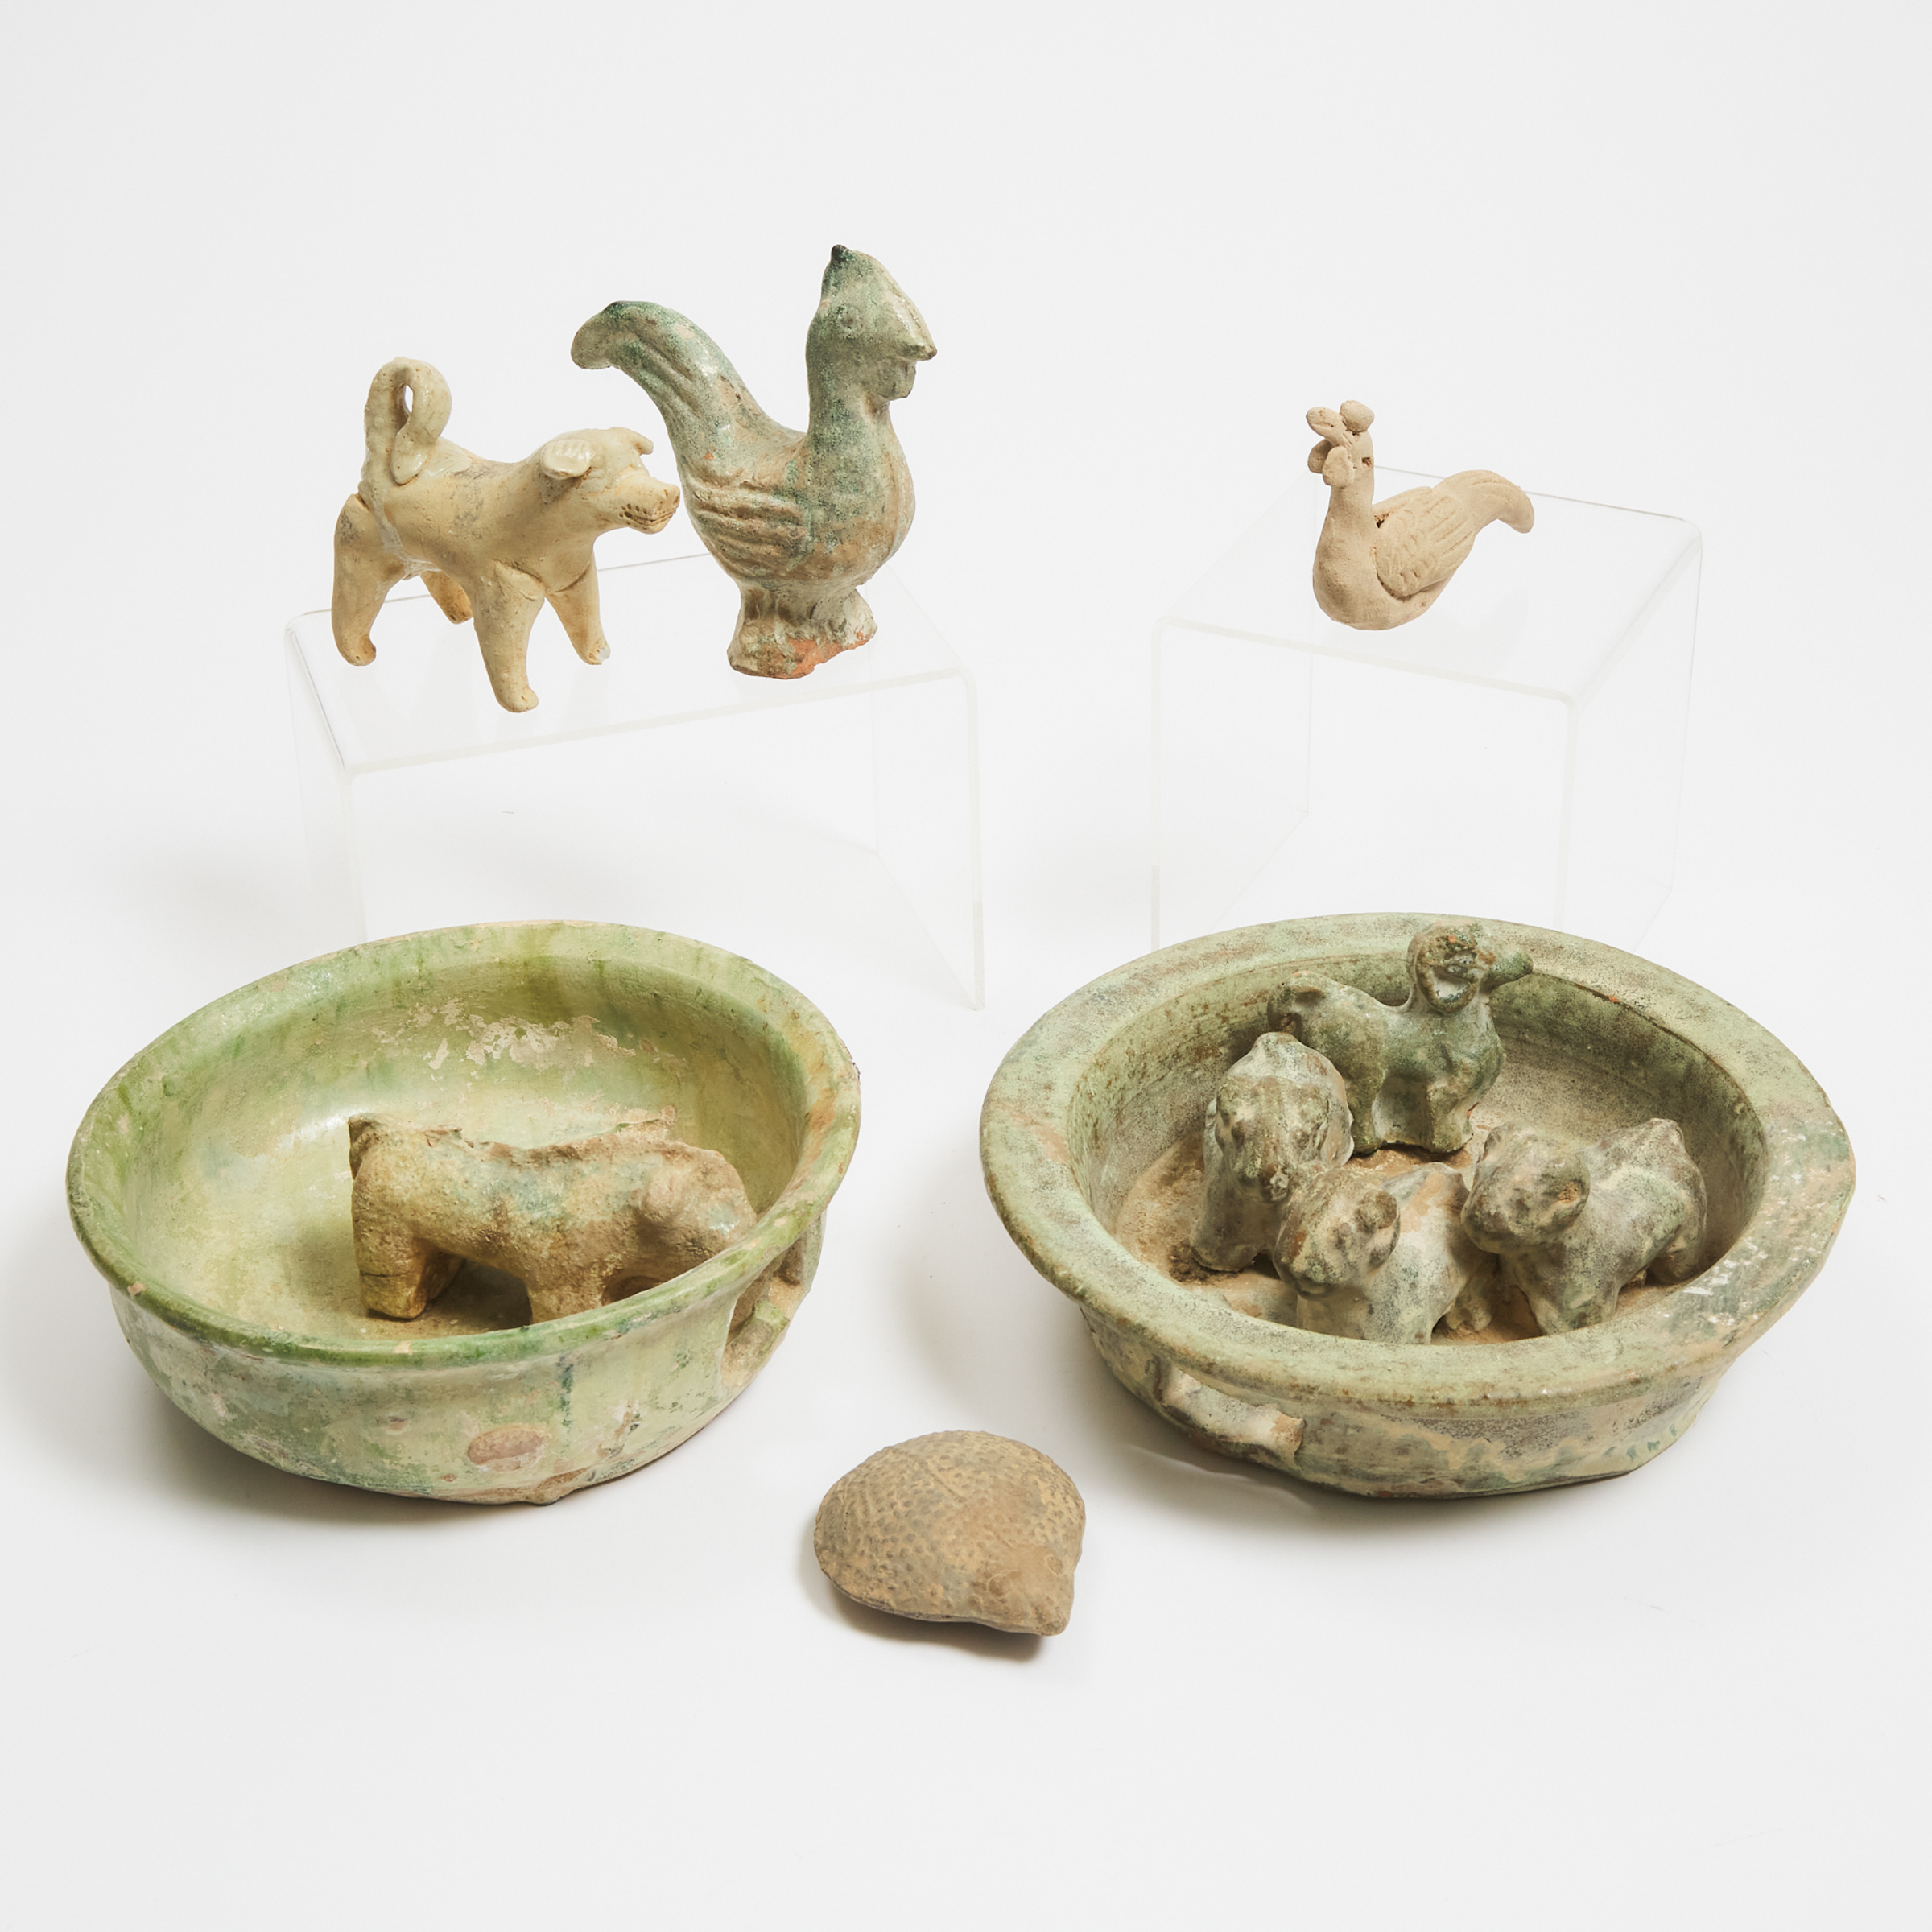 A Group of Six Green-Glazed Pottery Animal Pens and Animals, Han Dynasty (206 BC-220 AD)